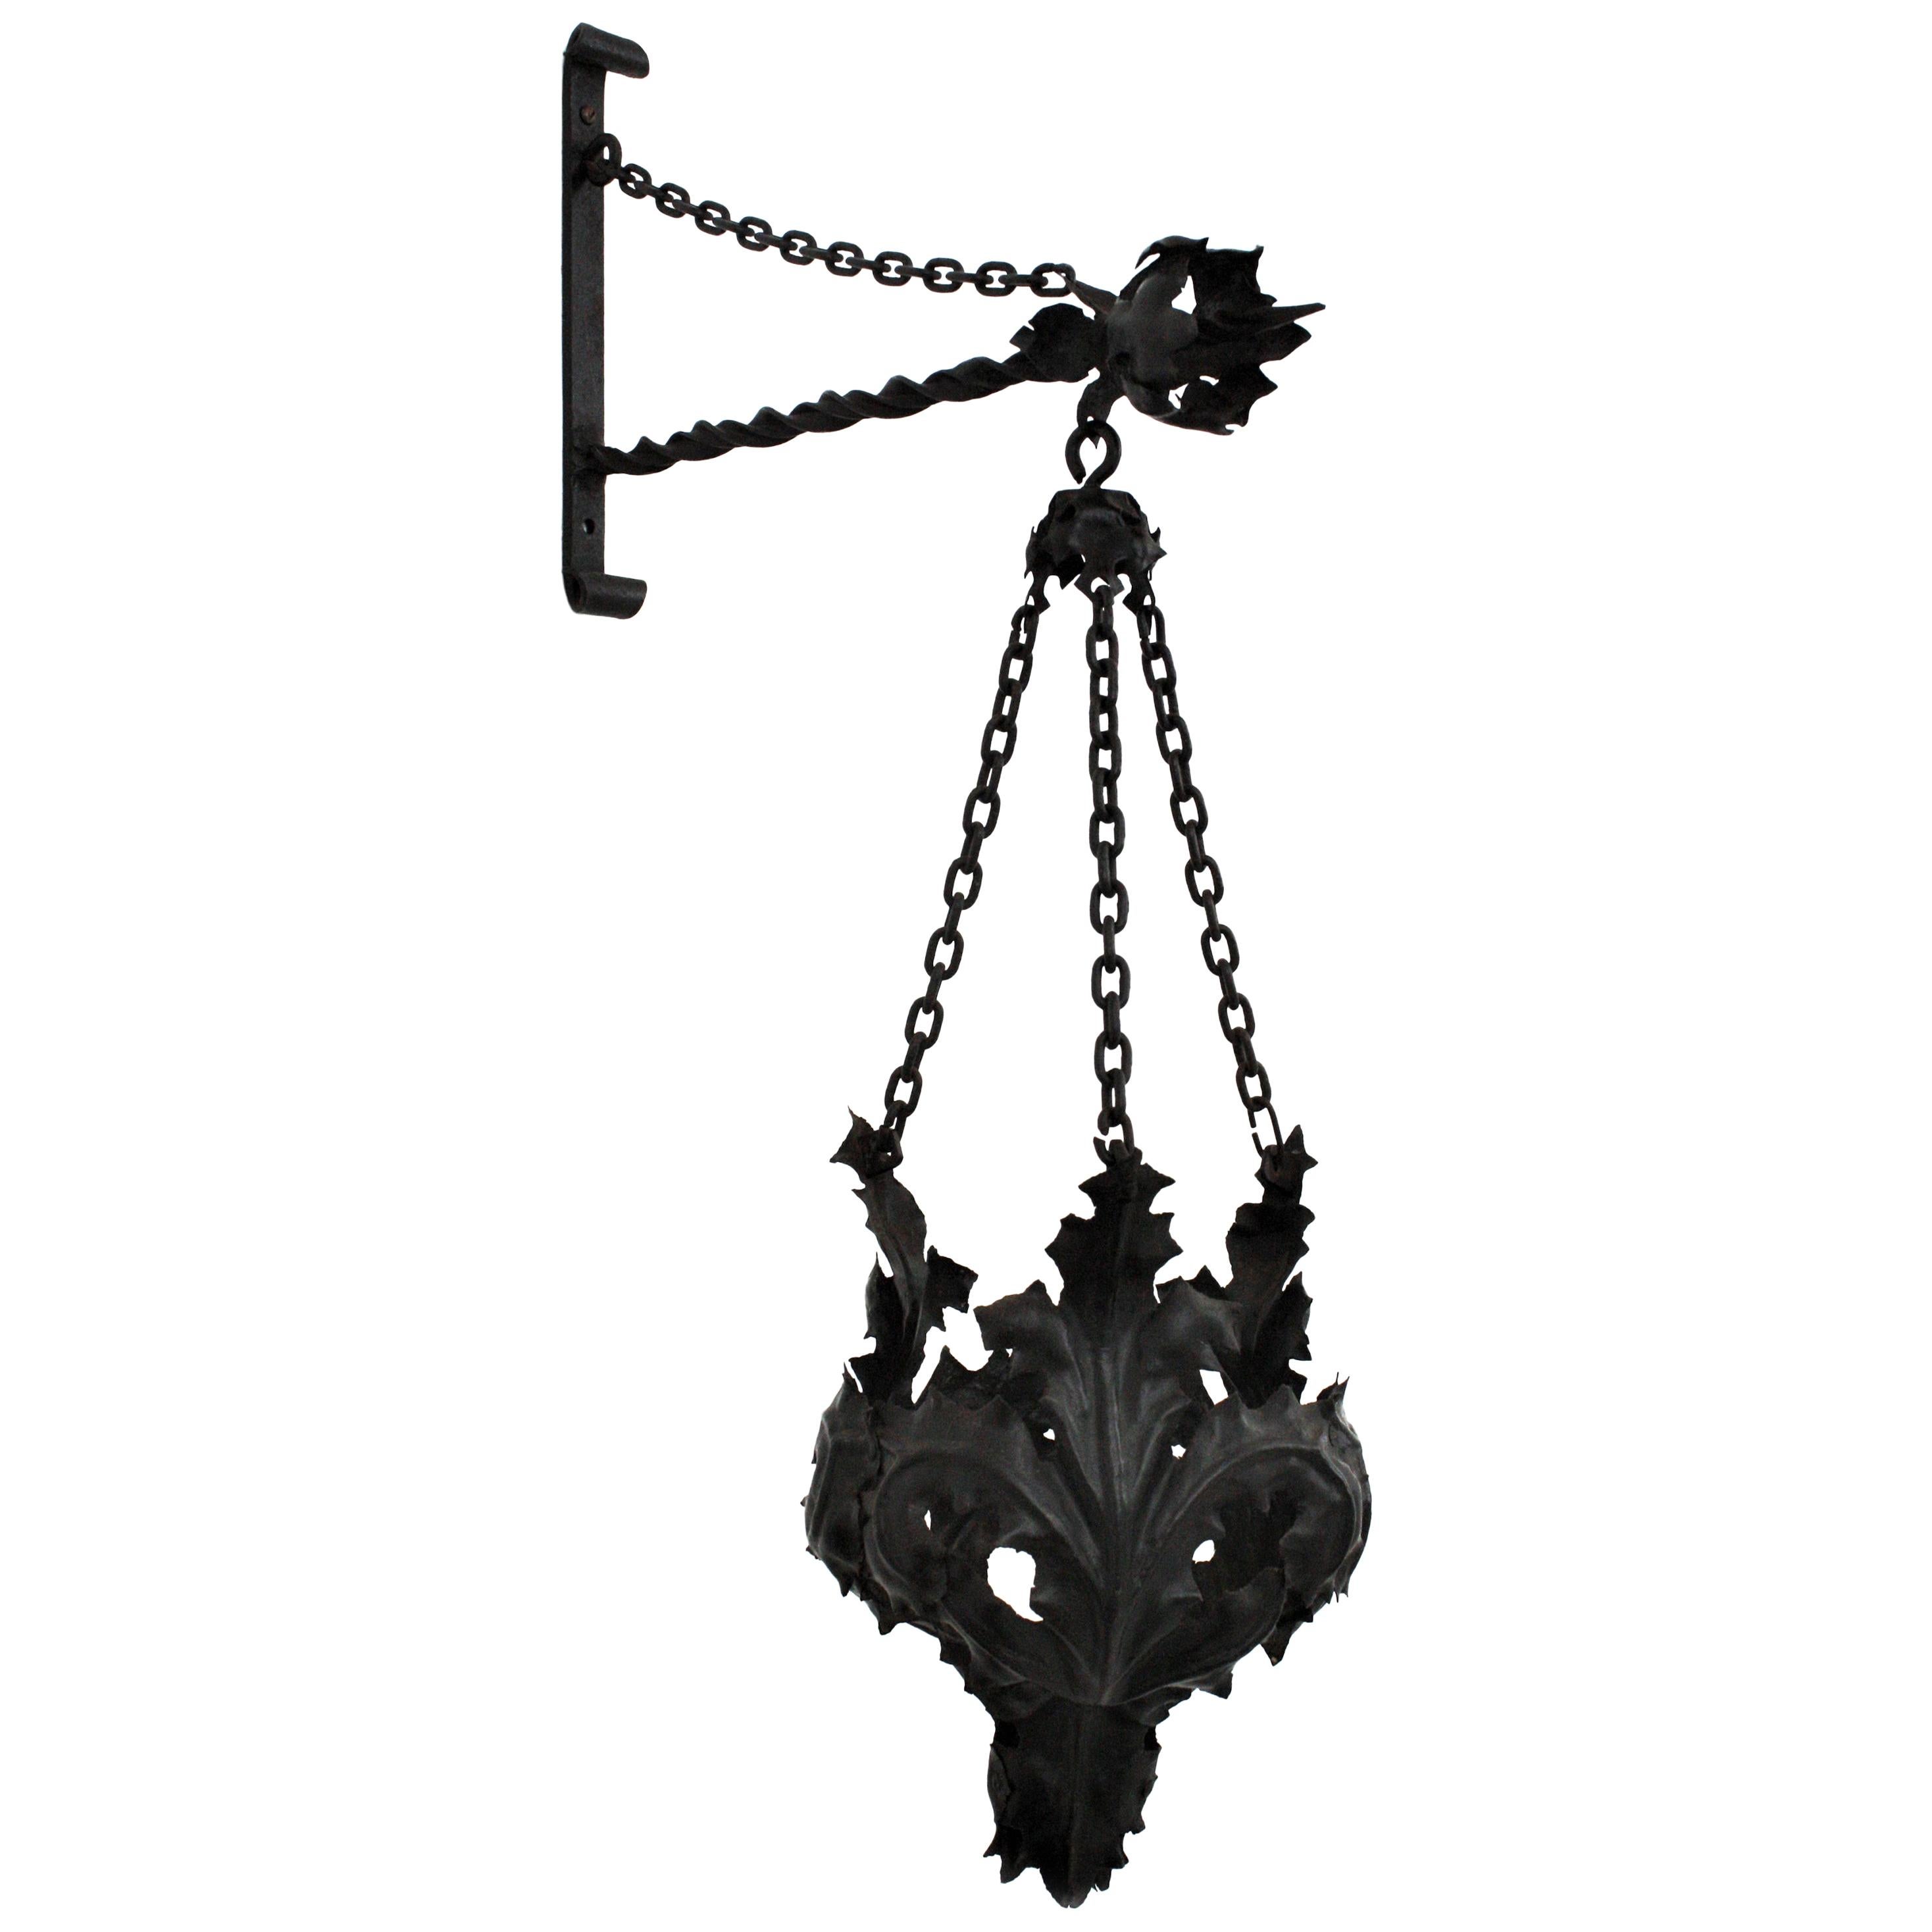 Spanish Wrought Iron Gothic Style Wall Hanging Planter with Foliage Motifs